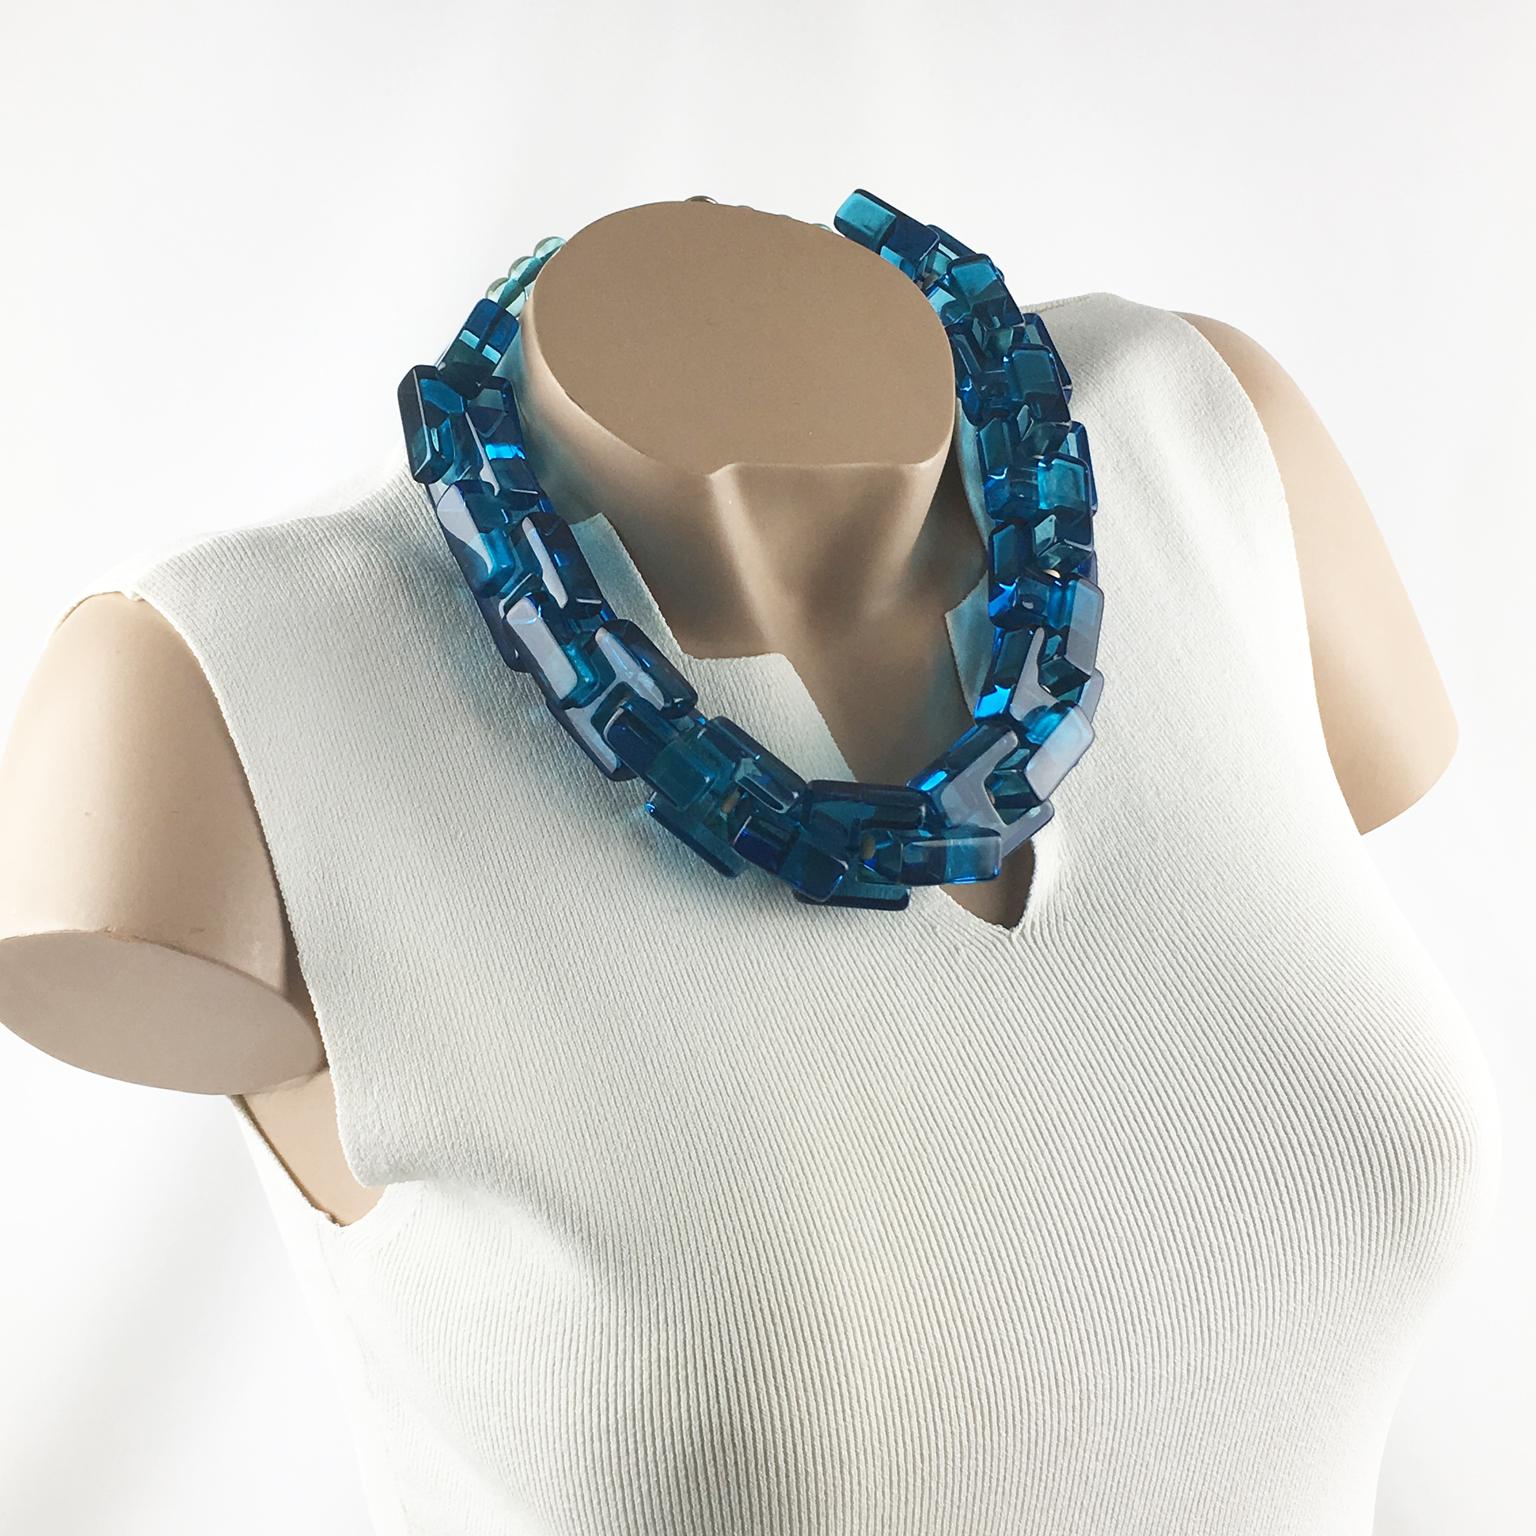 Beautiful sculptural Lucite choker necklace. Transparent ocean blue color in a heavy and bold carved massive chain links. Fits nicely around the neck. From an Italian design studio, no visible maker's mark. 
Measurements: Necklace total length is